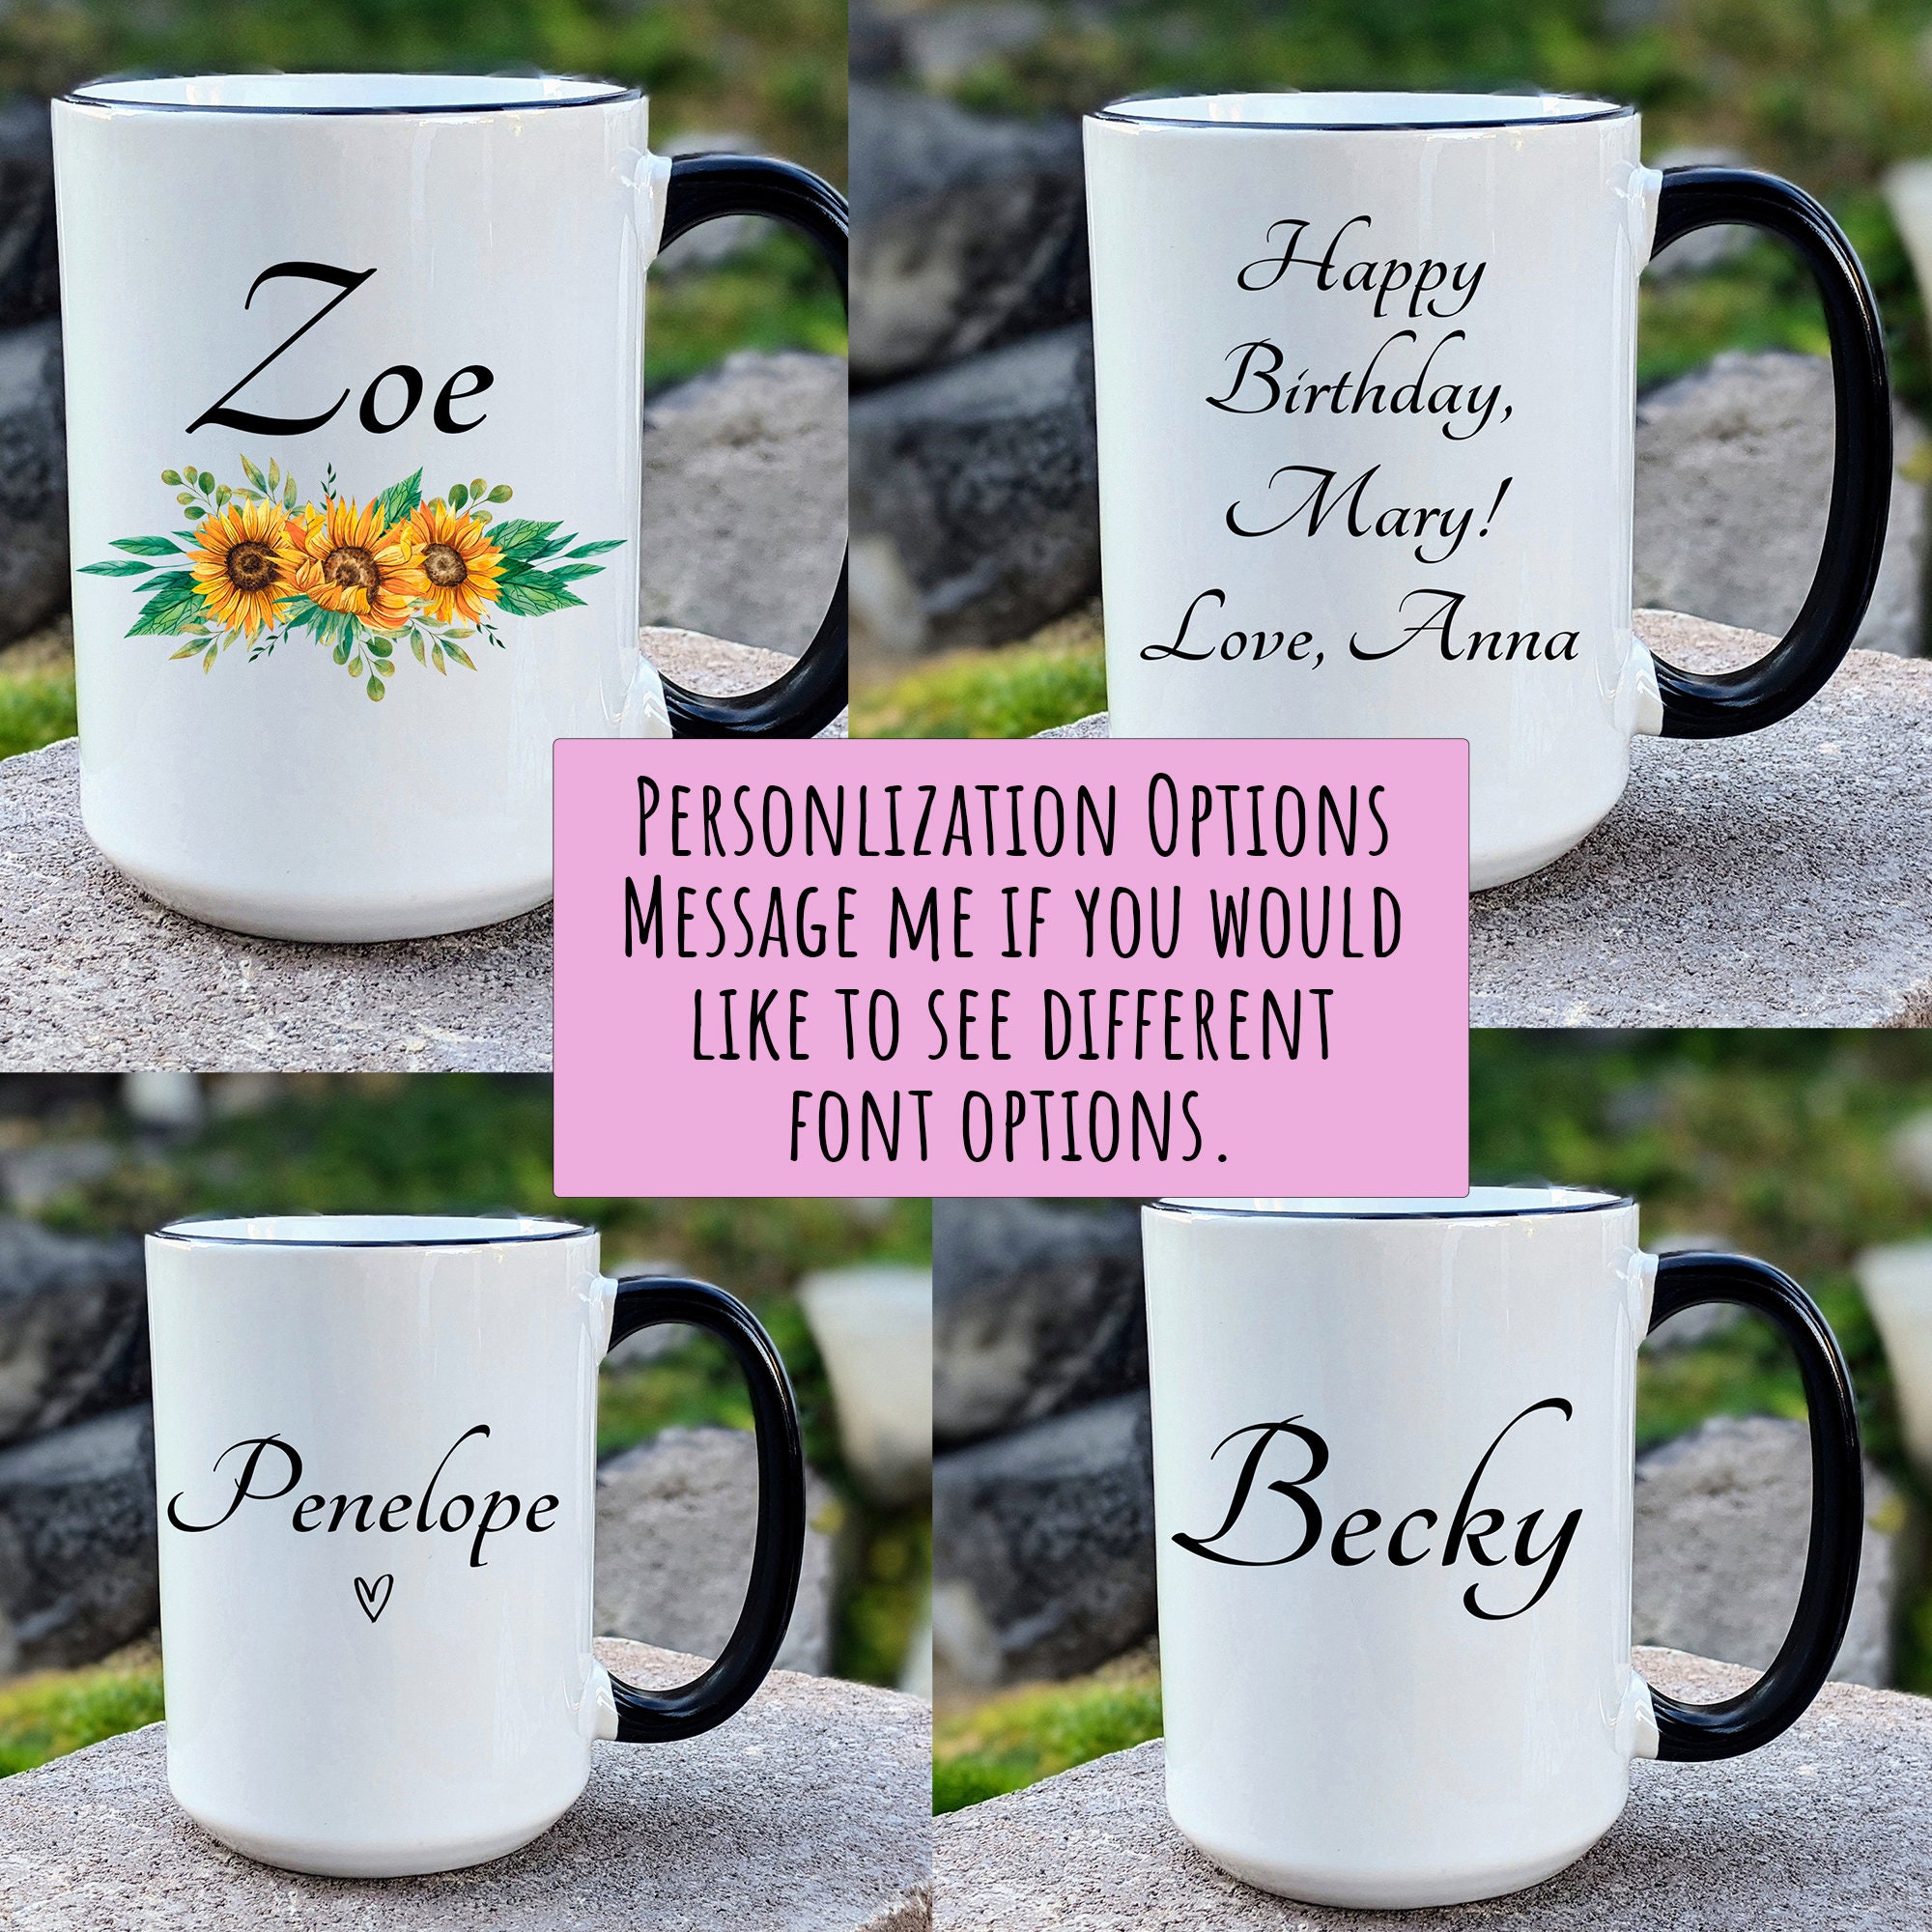 Comedy fishing mug gift personalised with own message 